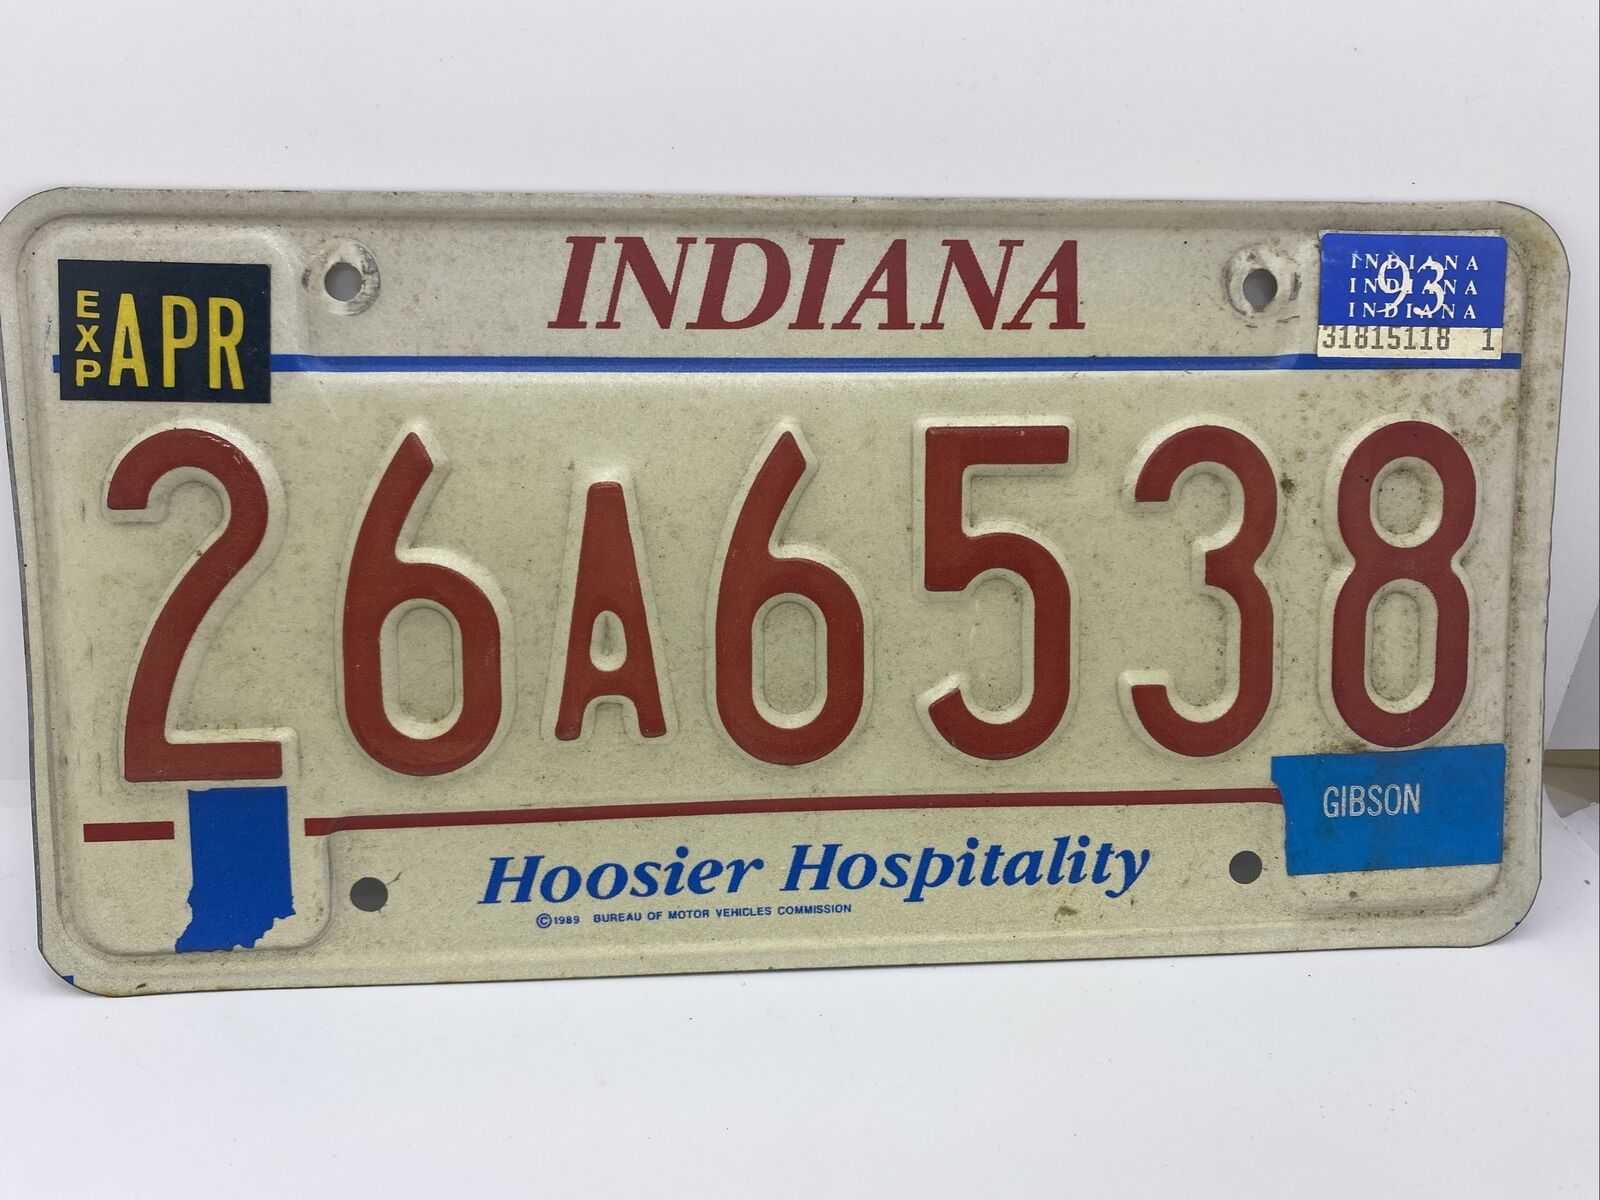 Vintage 1989 Indiana License Plate Hoosier Hospitality Gibson